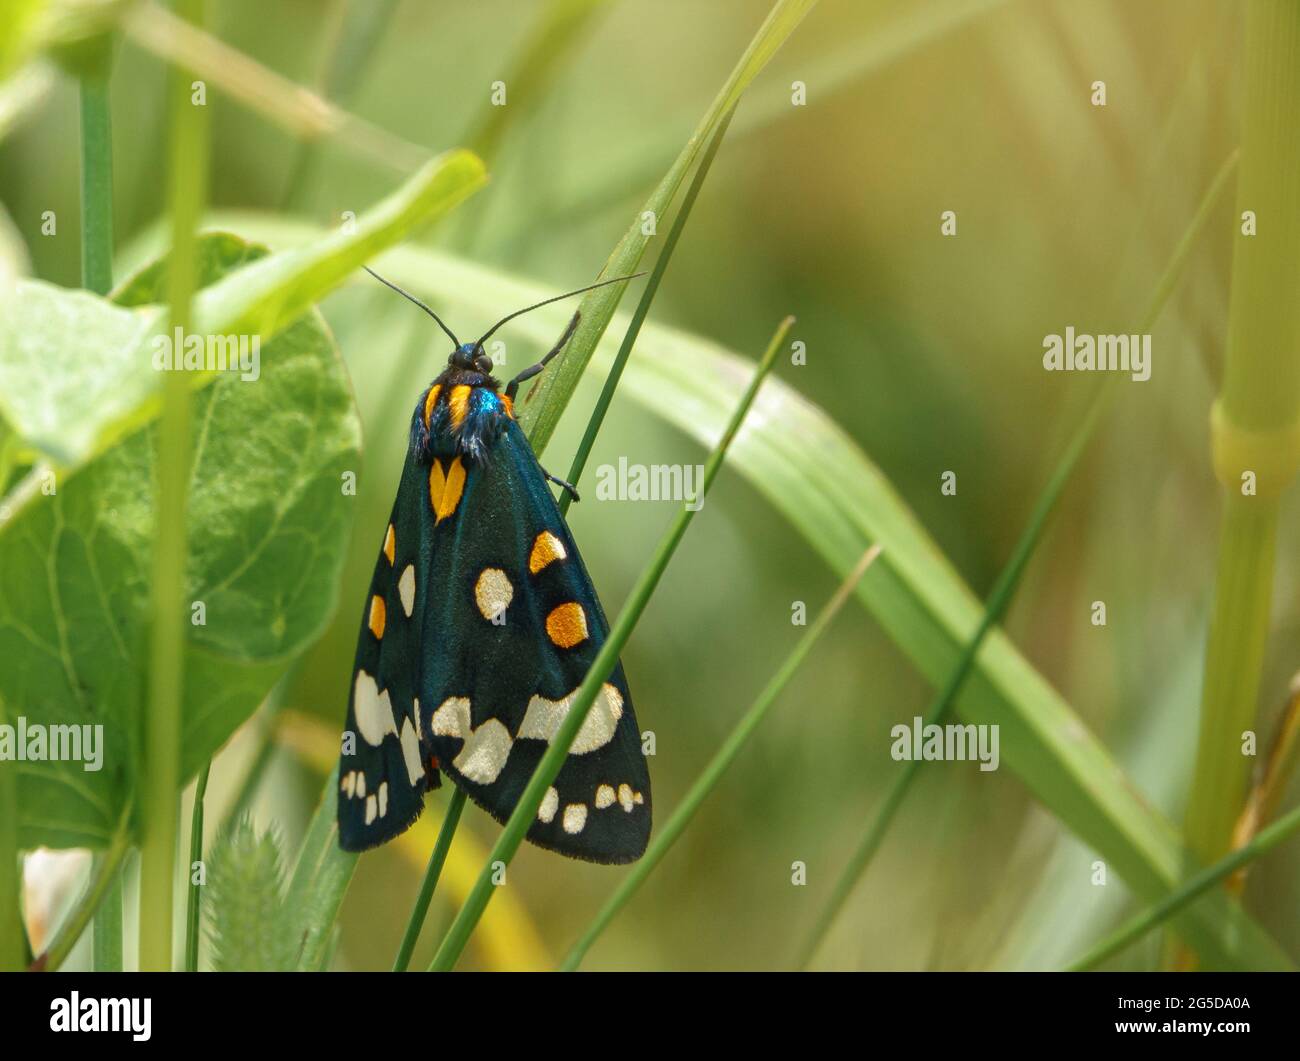 close up of a beautiful scarlet tiger moth (Callimorpha dominula, formerly Panaxia dominula) resting on a grass blade Stock Photo